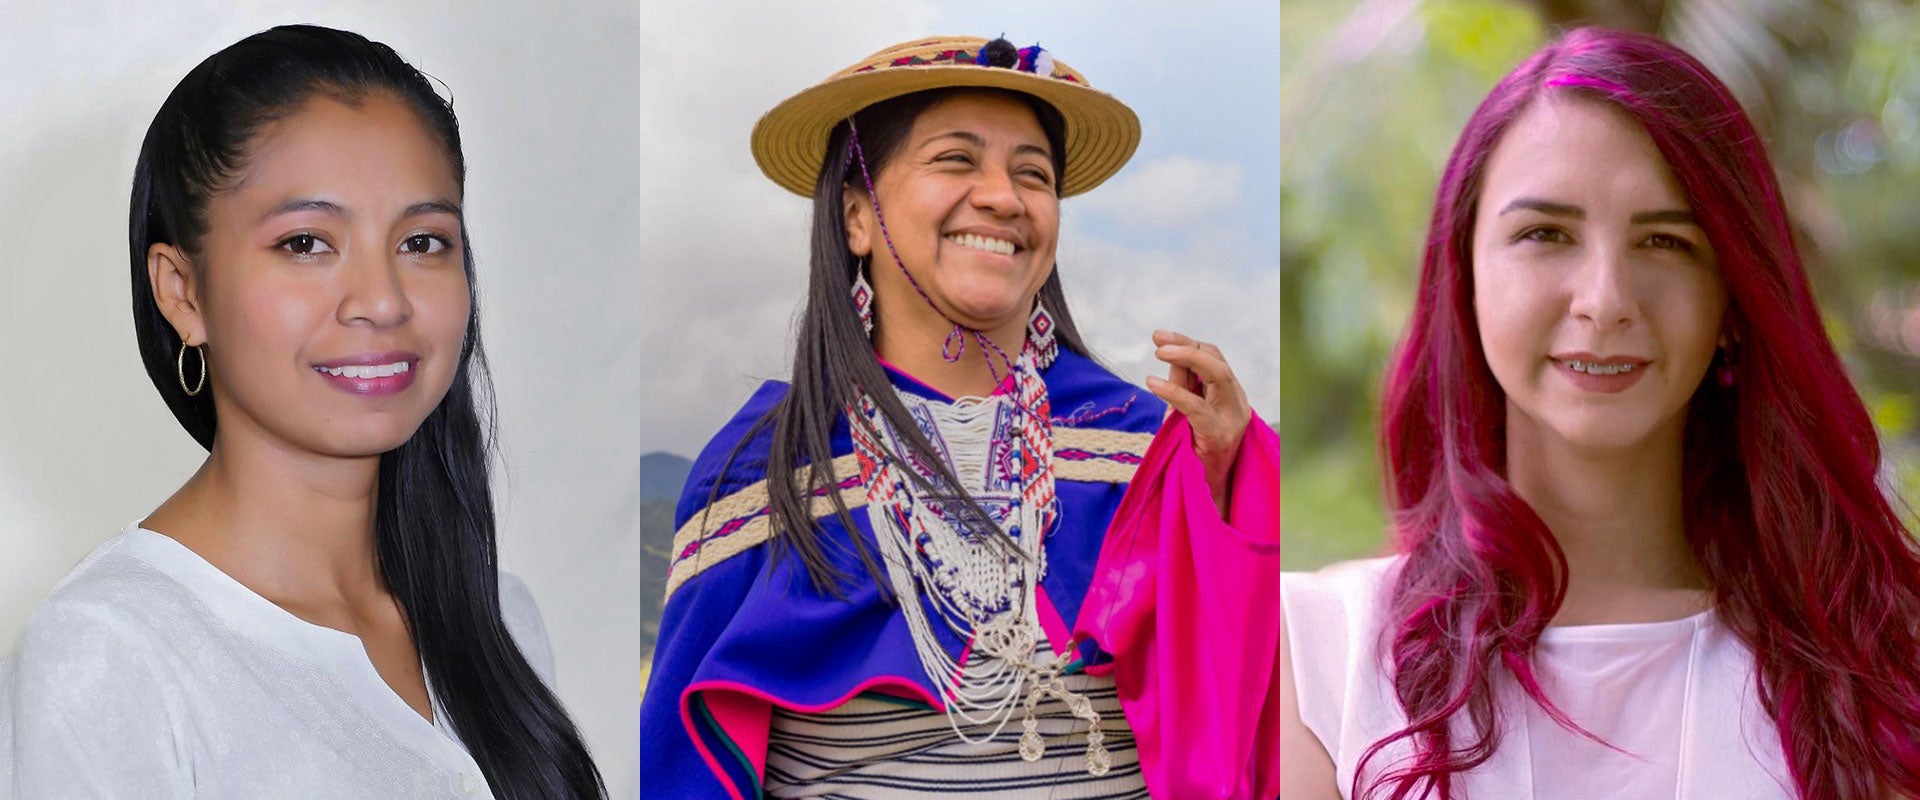 There's a long way to go”: Three women share their stories of overcoming  political violence in Colombia